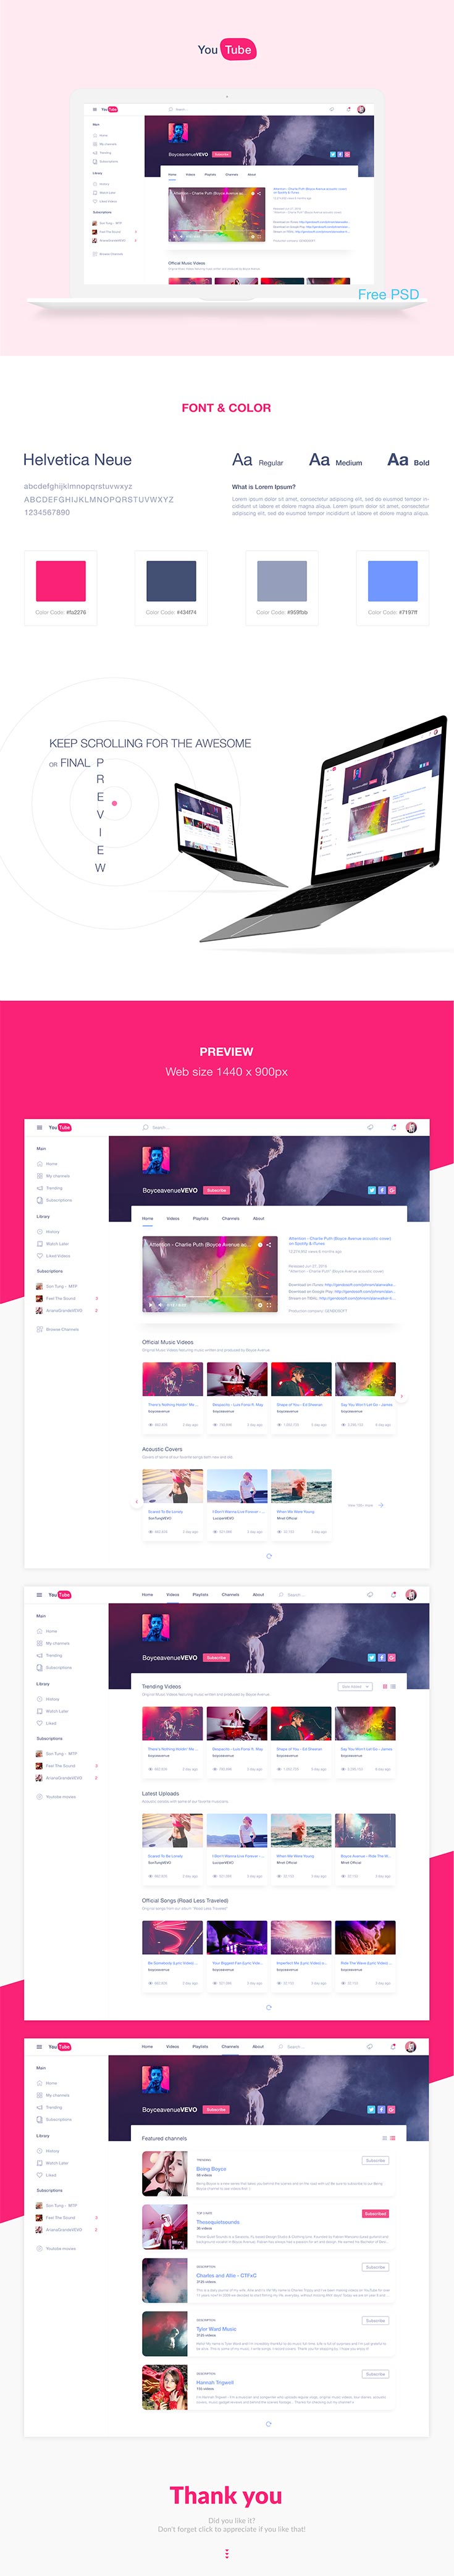 Free YouTube Redesign Template